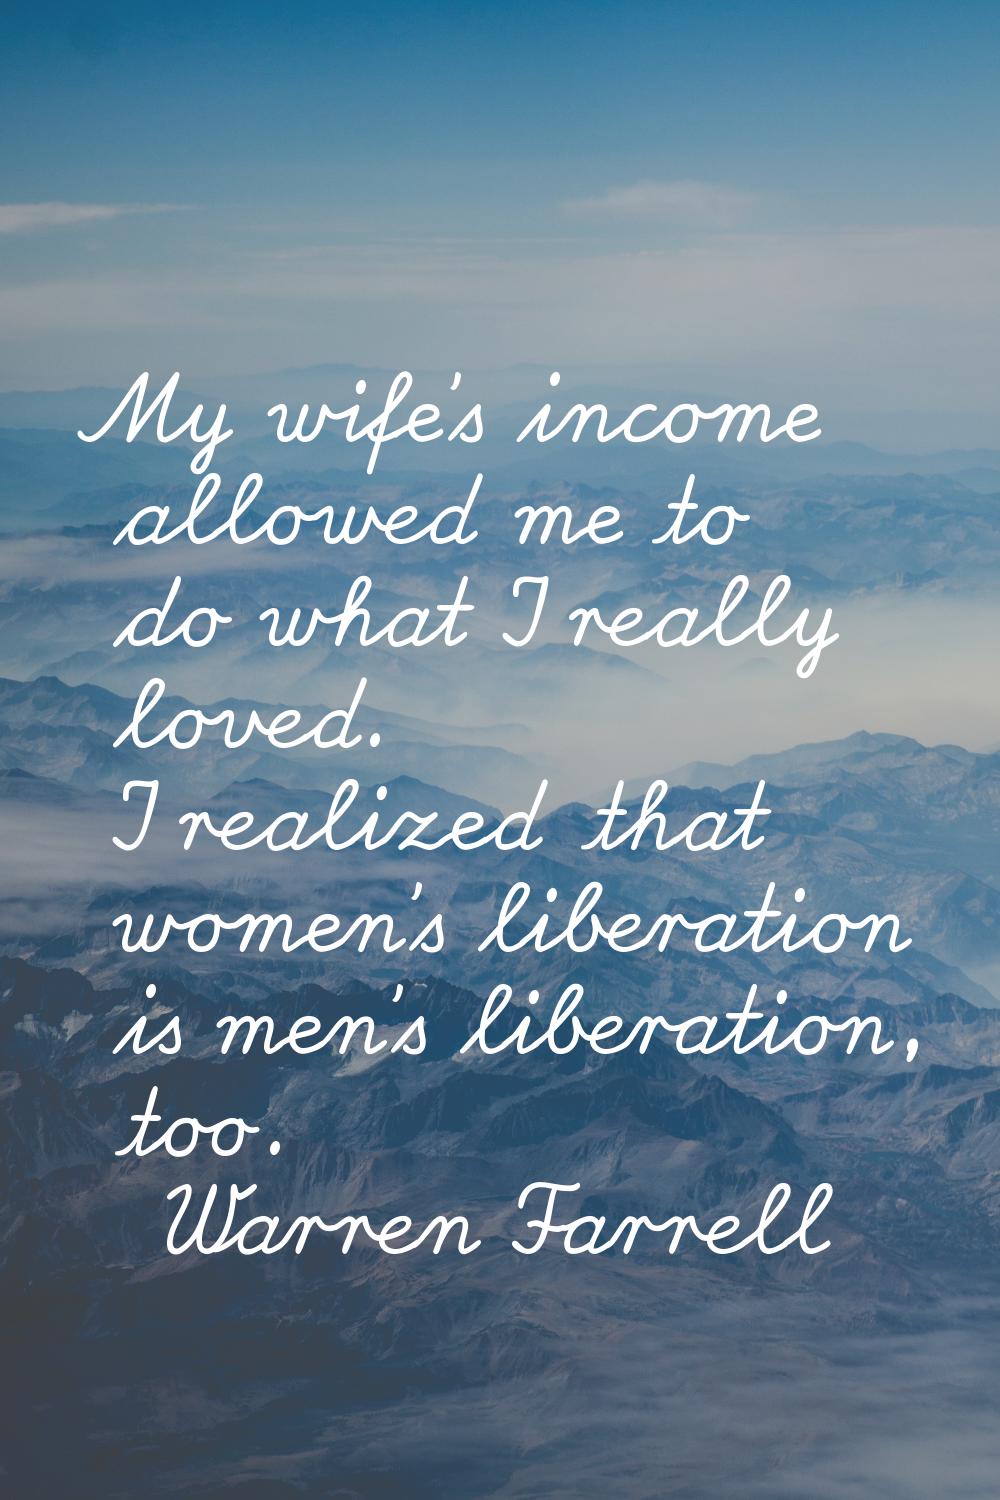 My wife's income allowed me to do what I really loved. I realized that women's liberation is men's 